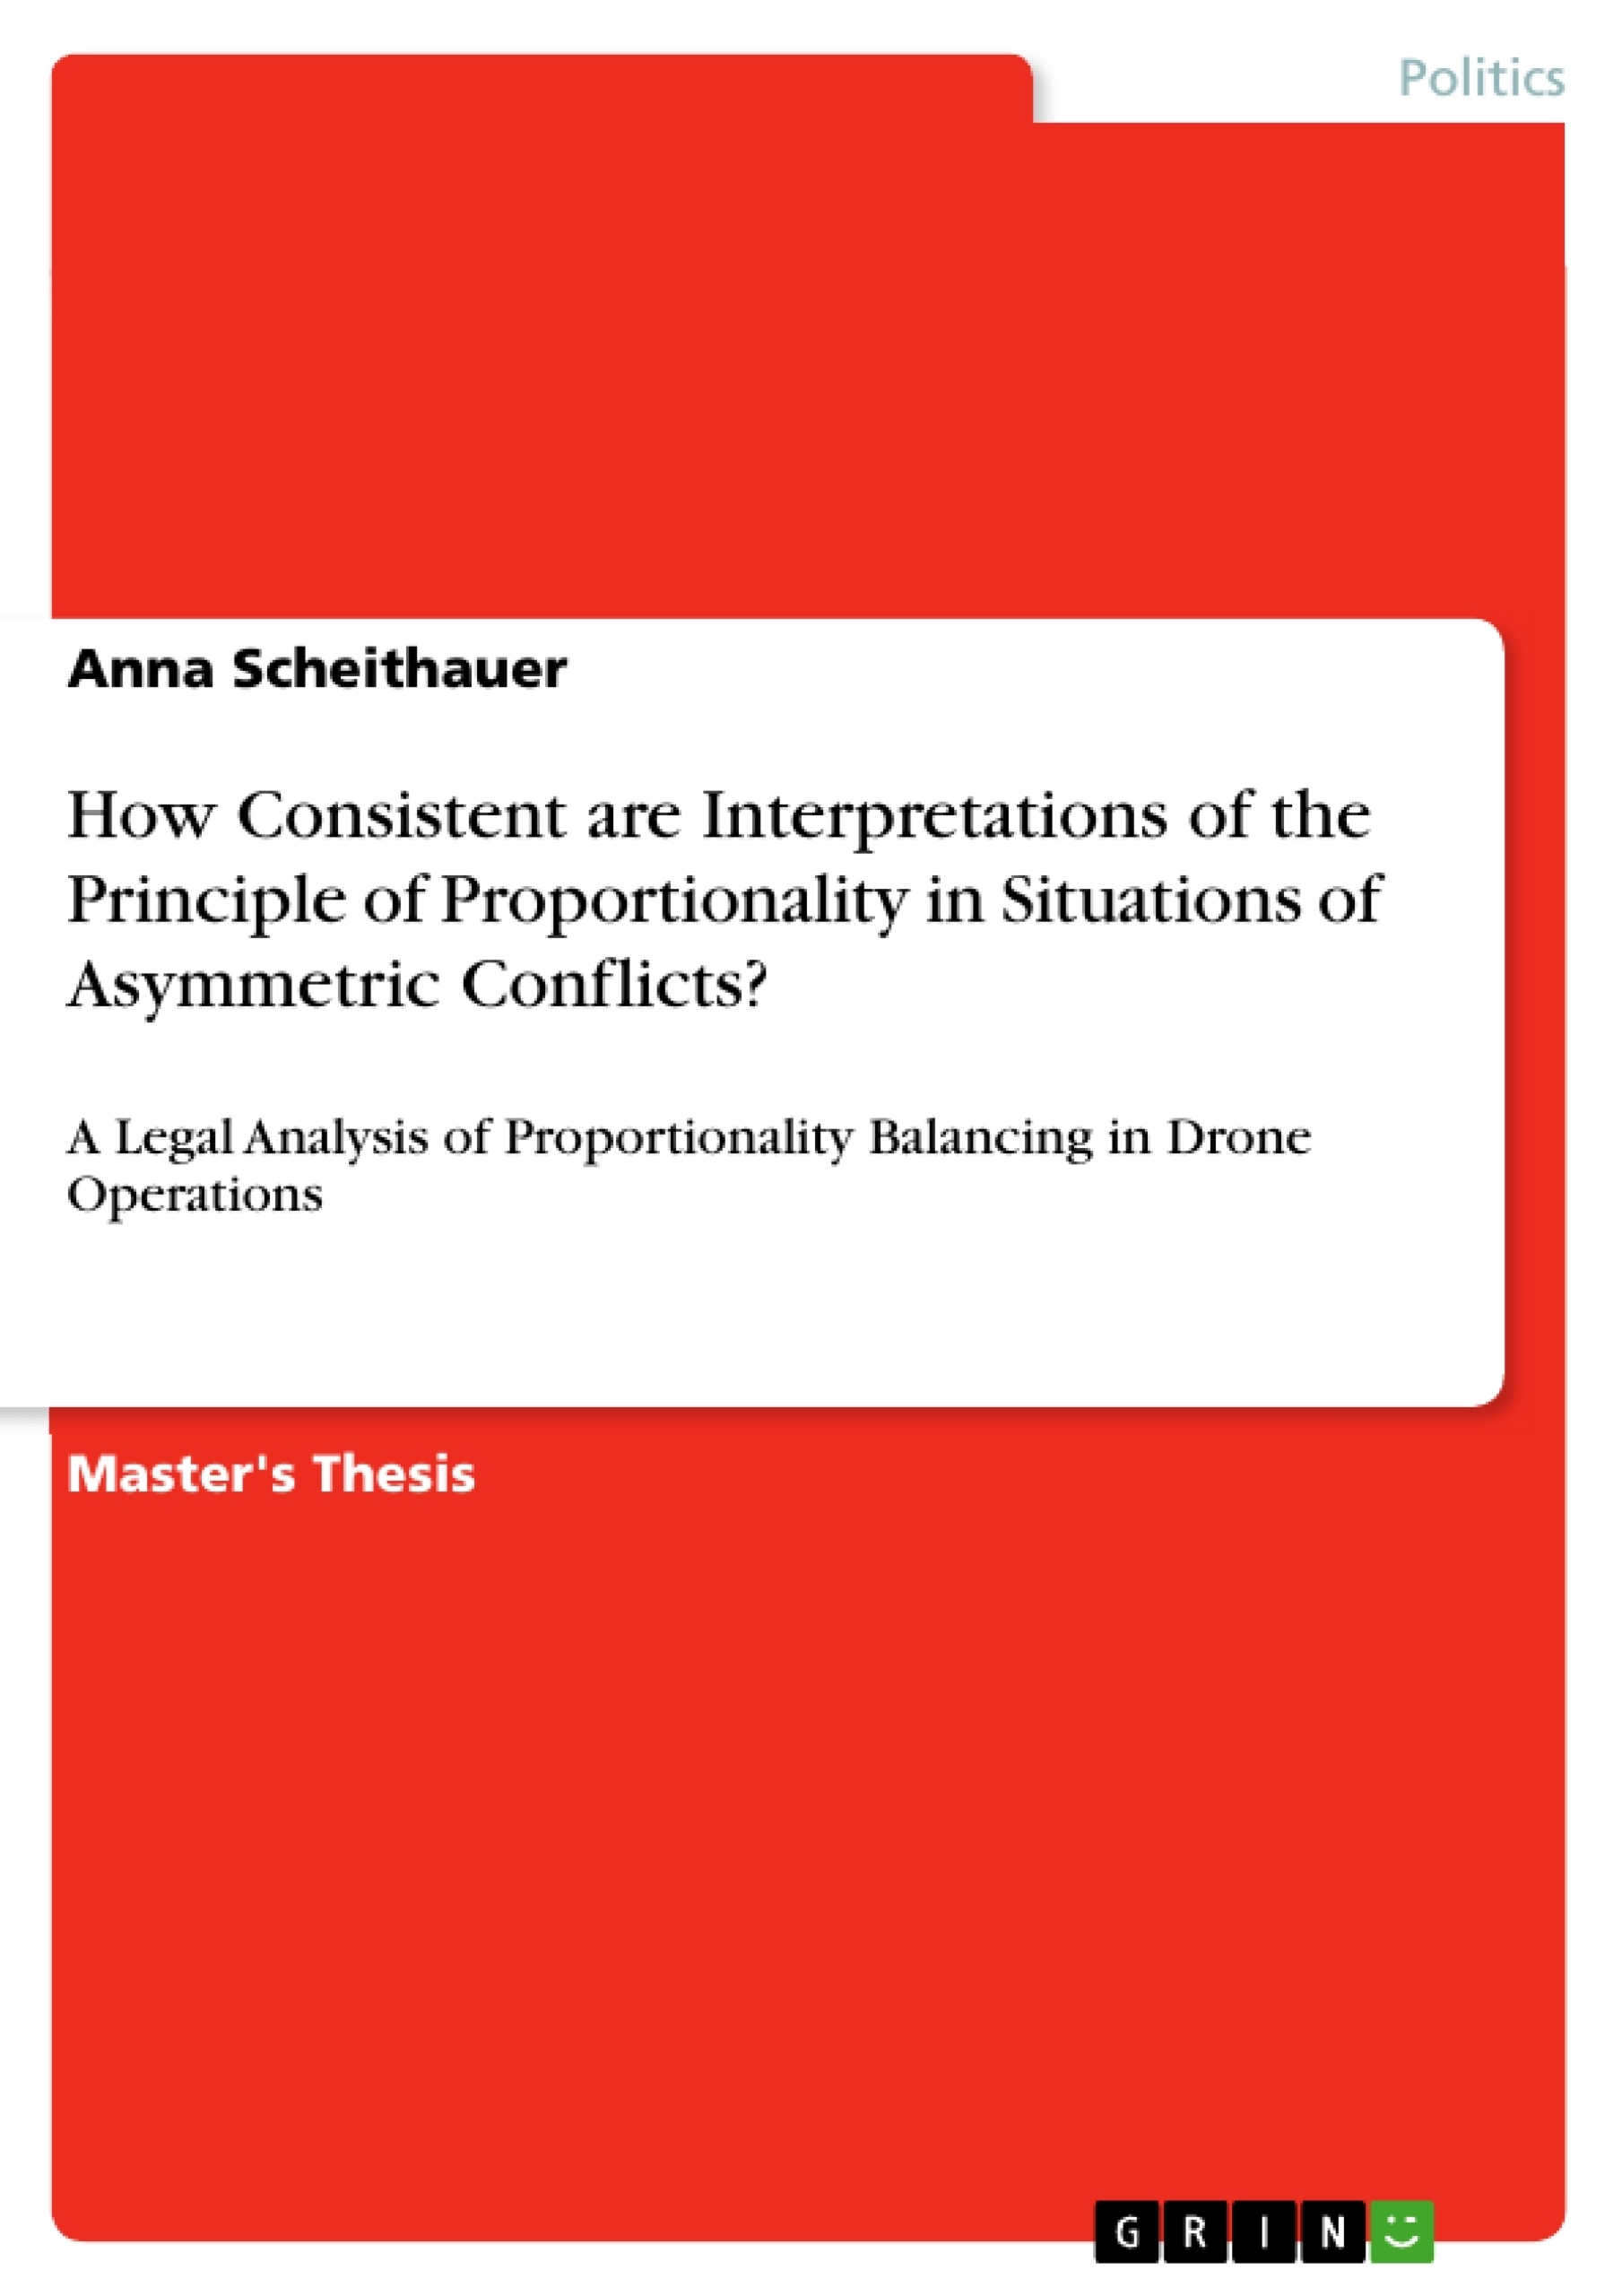 Título: How Consistent are Interpretations of the Principle of Proportionality in Situations of Asymmetric Conflicts?